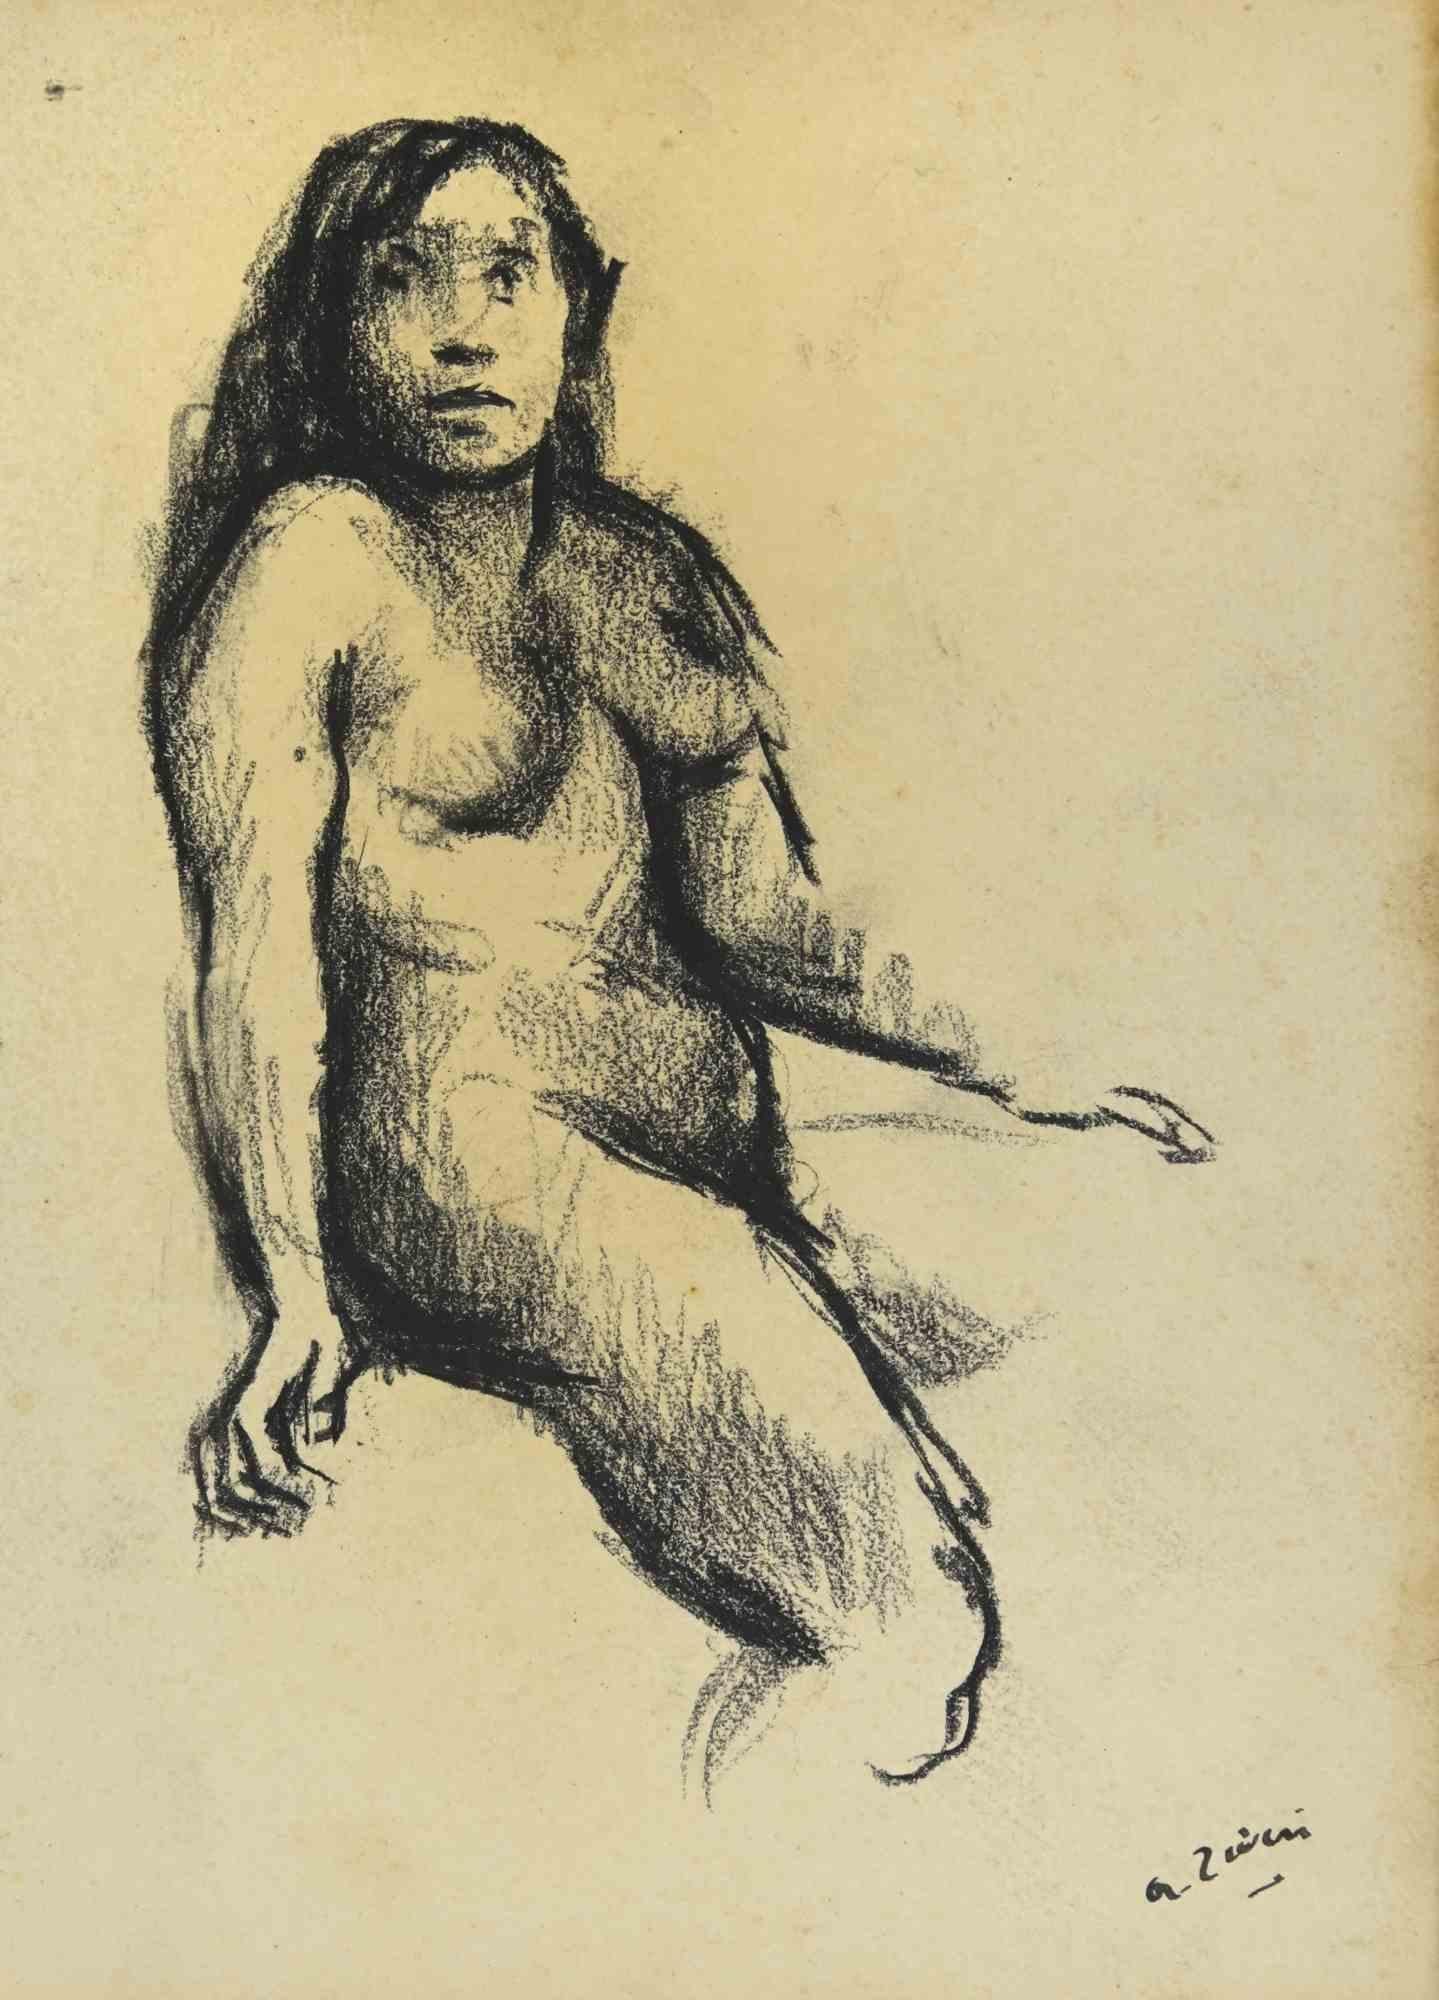 Nude is a drawing realized by Alberto Ziveri in the 1930s.

Charcoal on paper.

Hand-signed and dated.

In good conditions with slight foxing.

The artwork is represented through deft strokes masterly.

Alberto Ziveri (Rome,1908 – 1990), the Italian